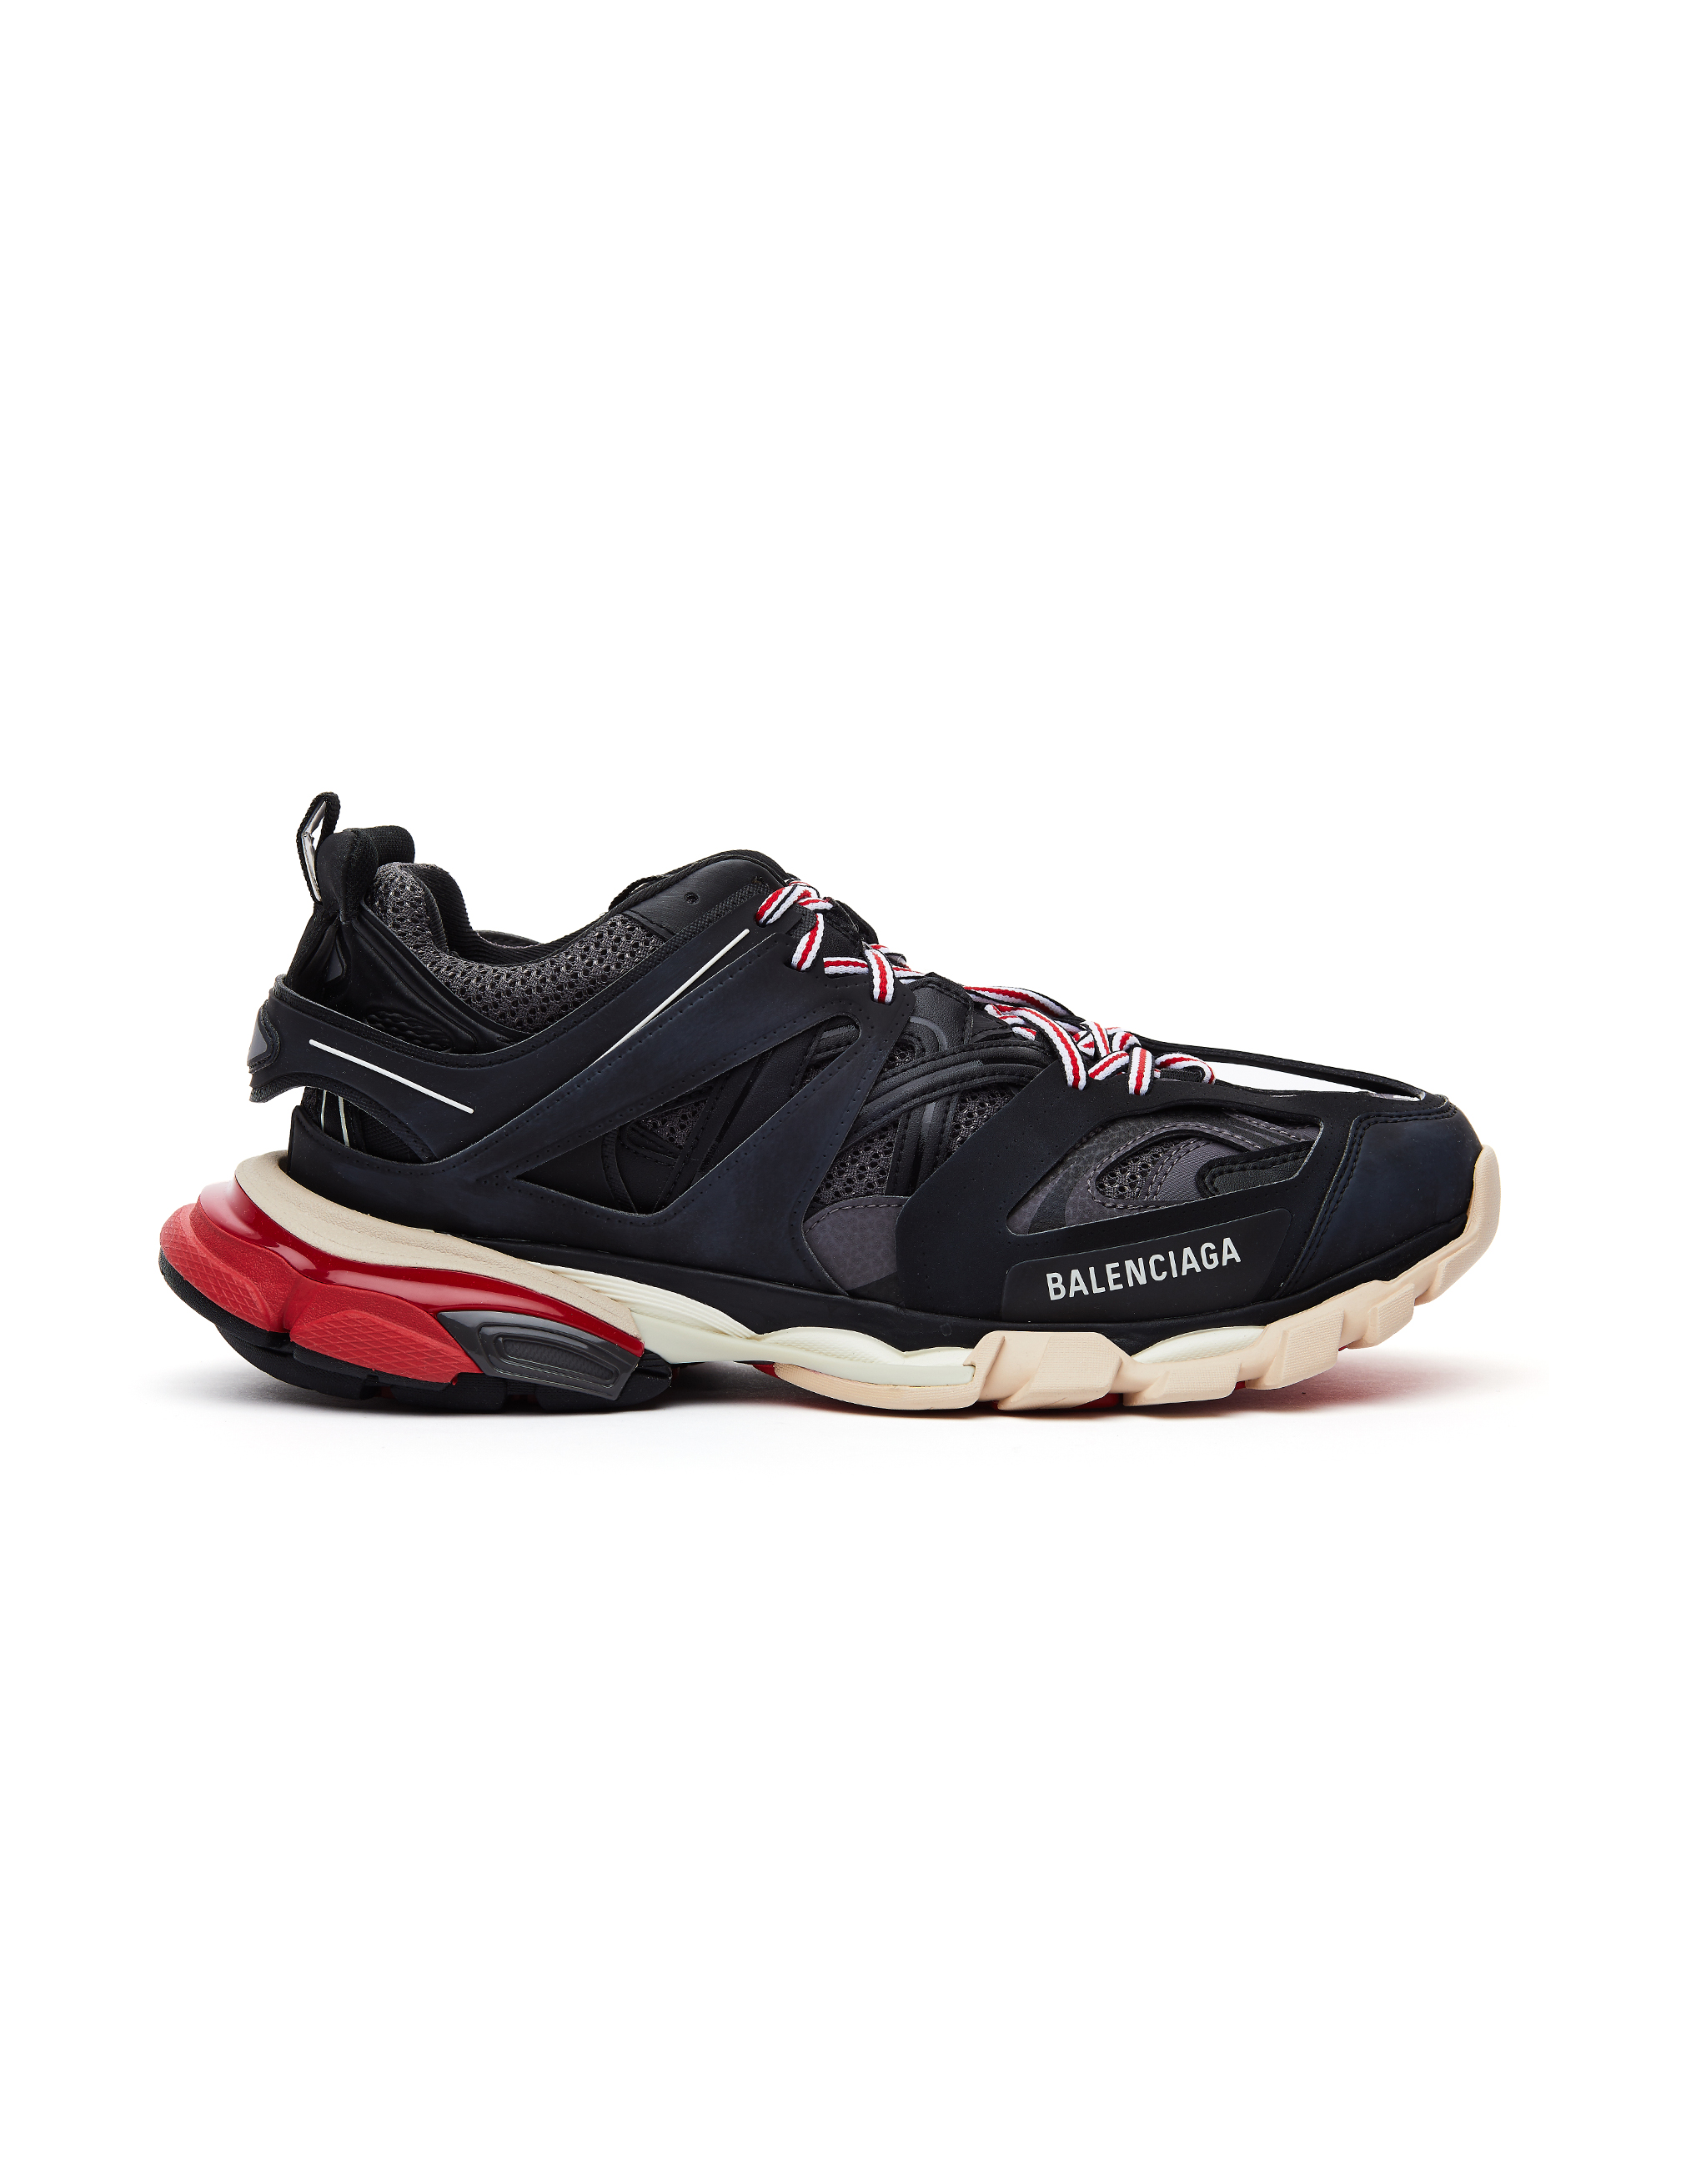 red and black balenciaga sneakers